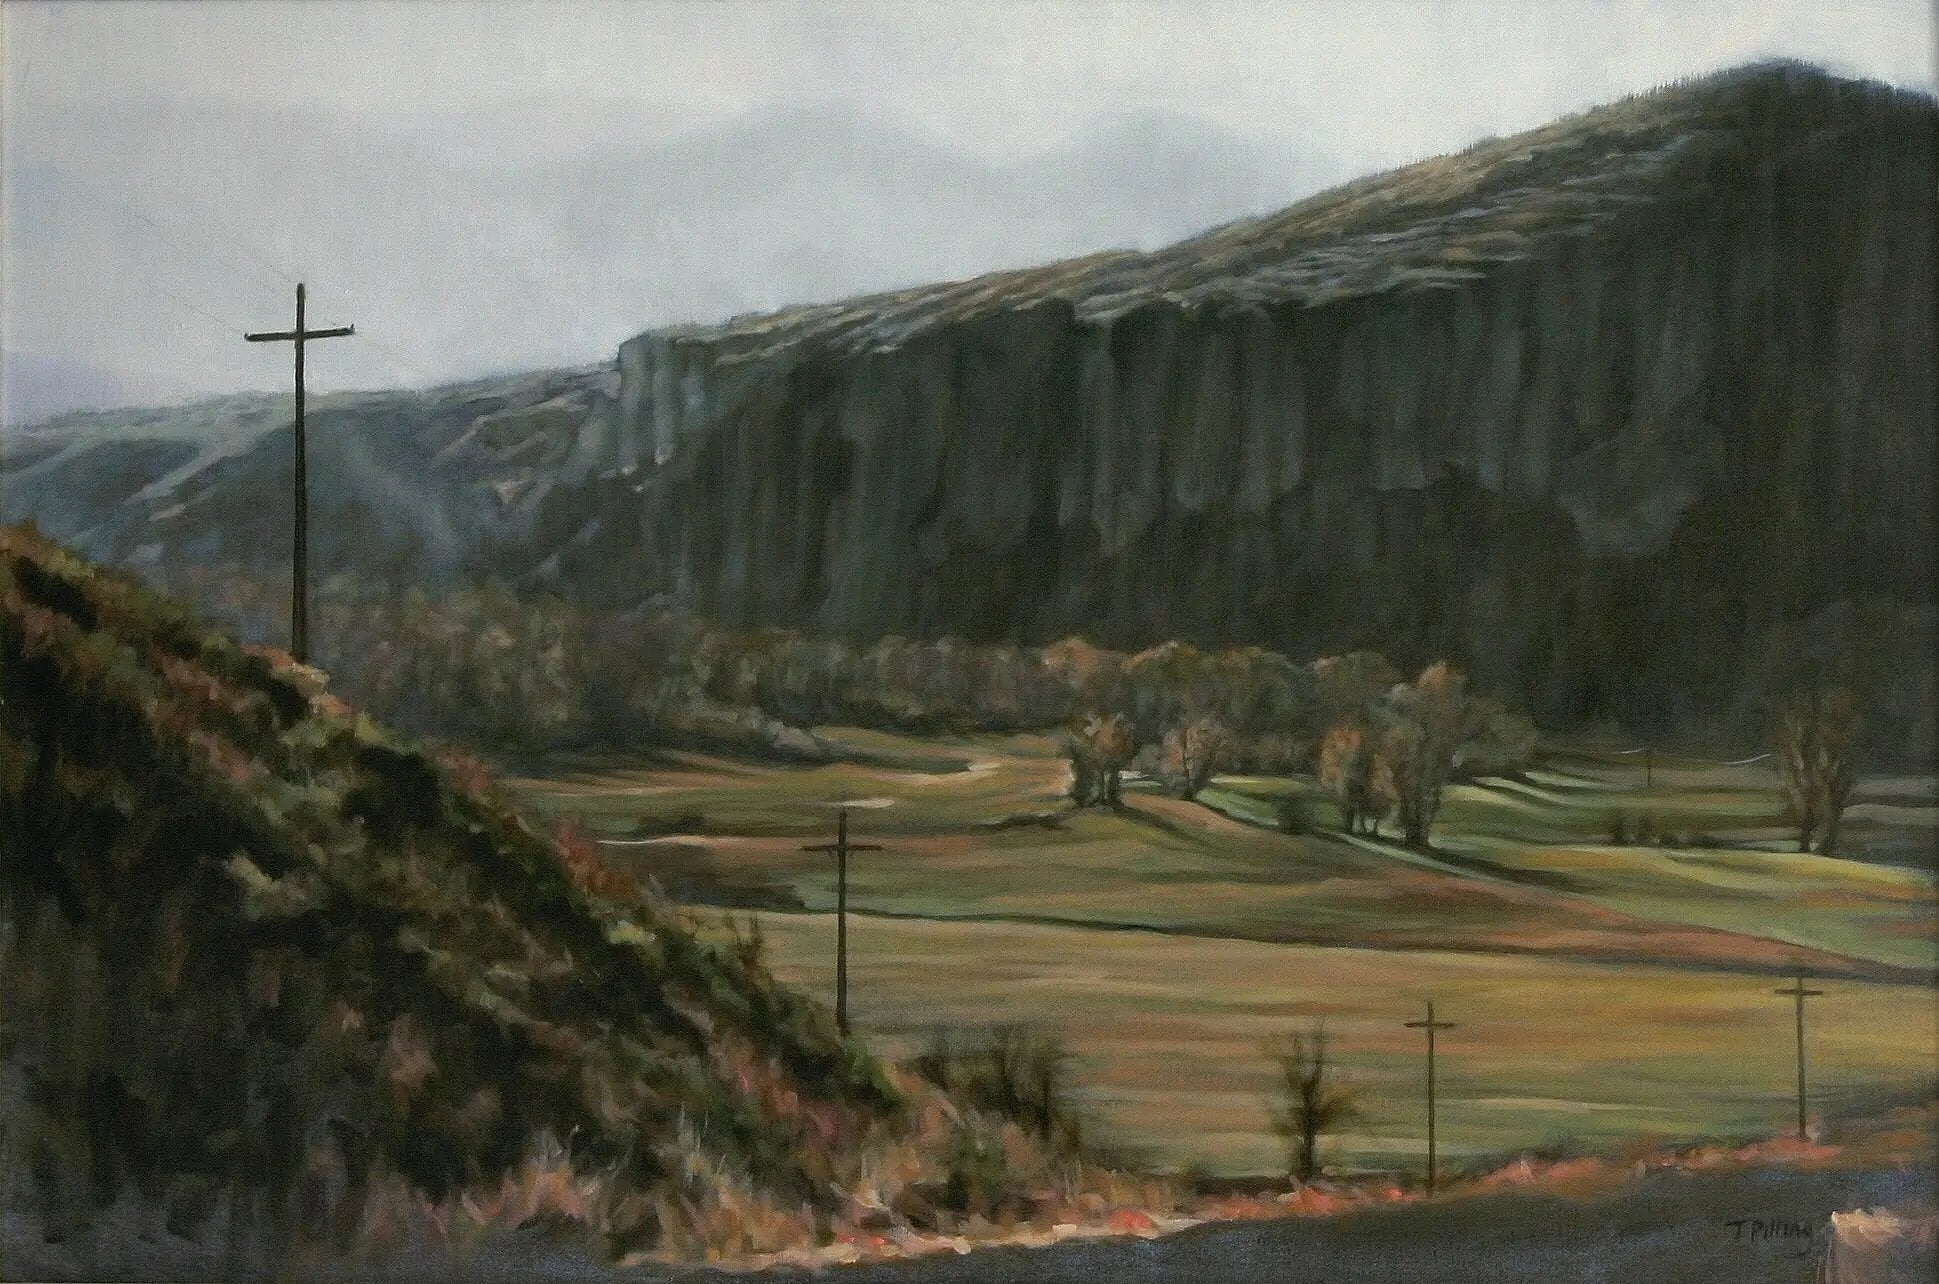 Landscape oil painting of mountains and valley in Kamas Utah. Painted by artist Tanya Pilling.